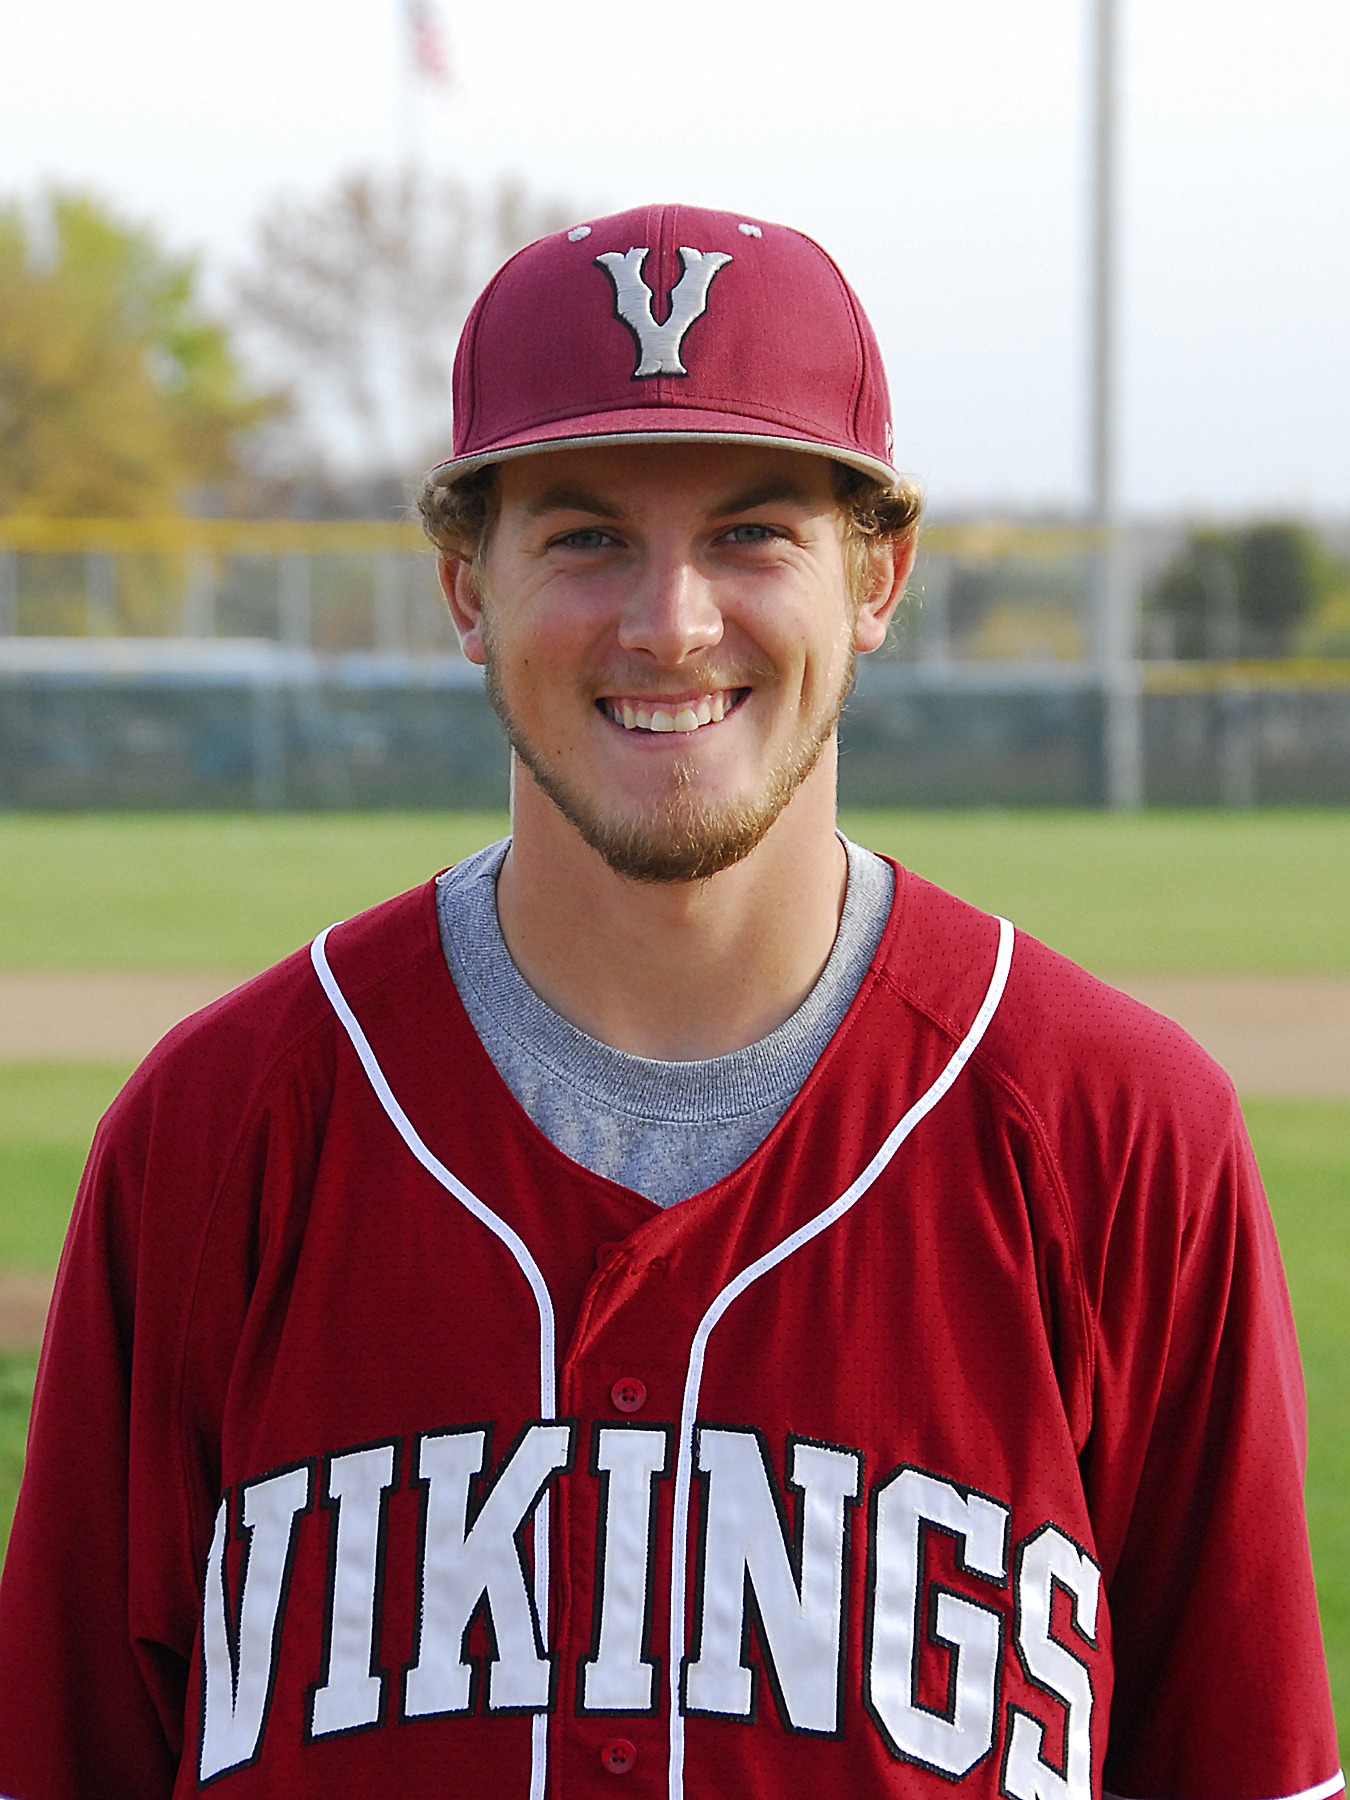 VCSU's Brady Anderson Named Honorable Mention